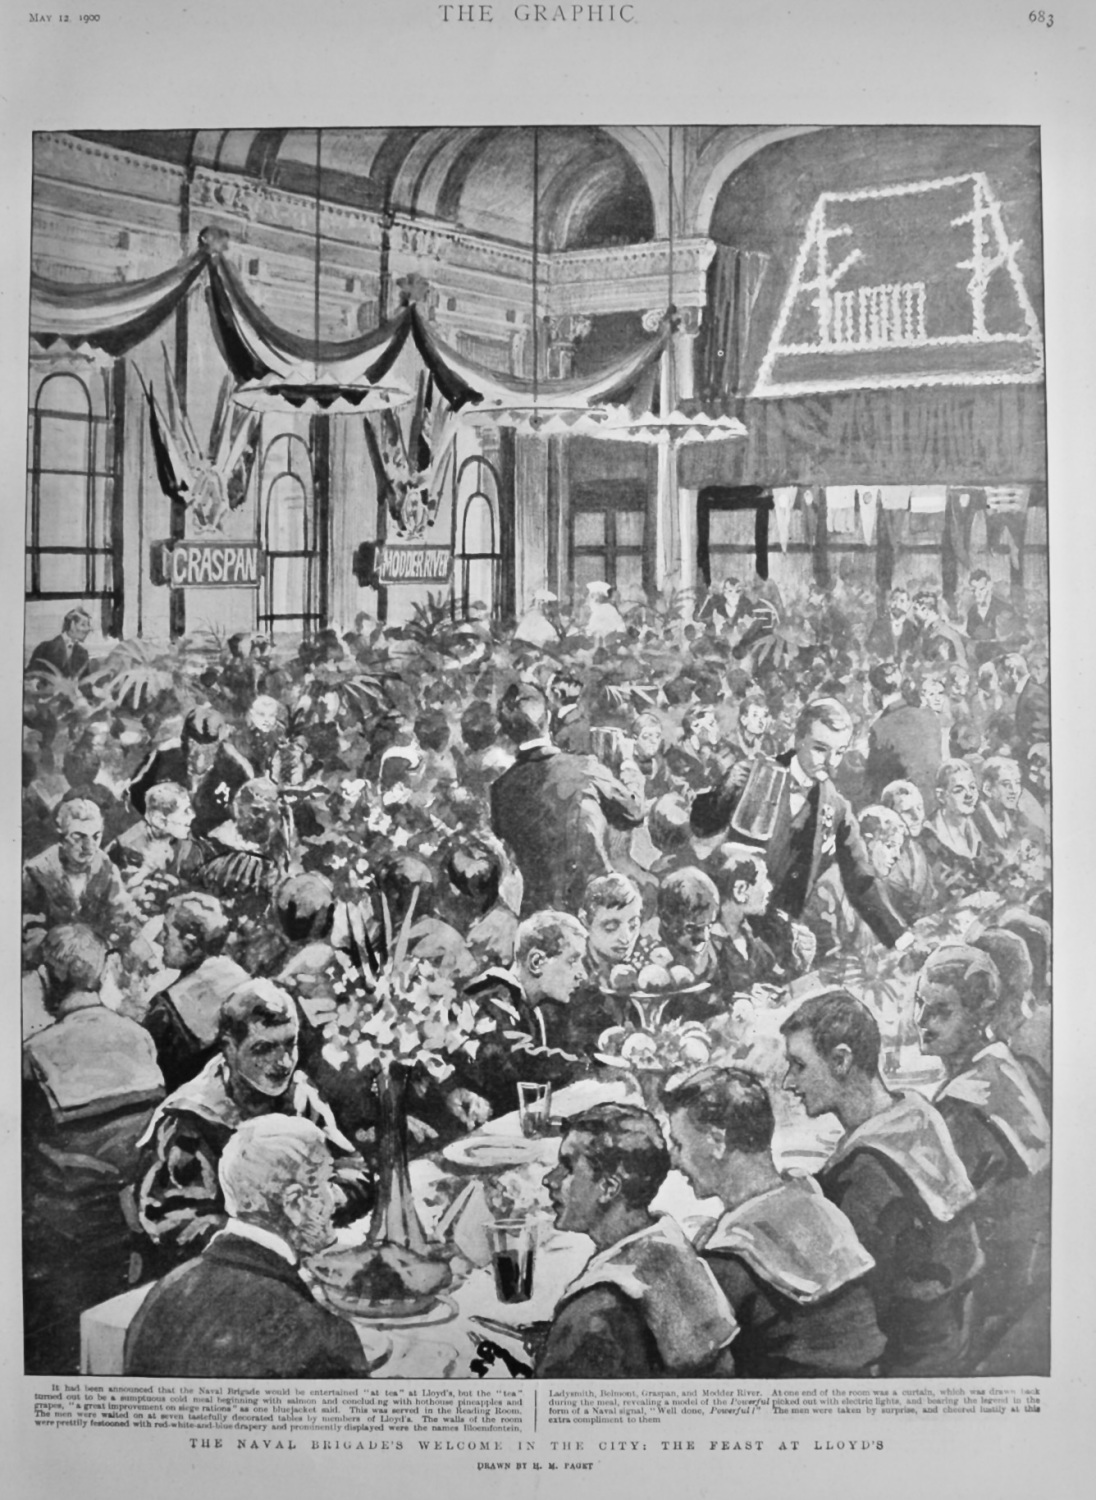 The Naval Brigade's Welcome in the City :  The Feast at Lloyd's.  1900.